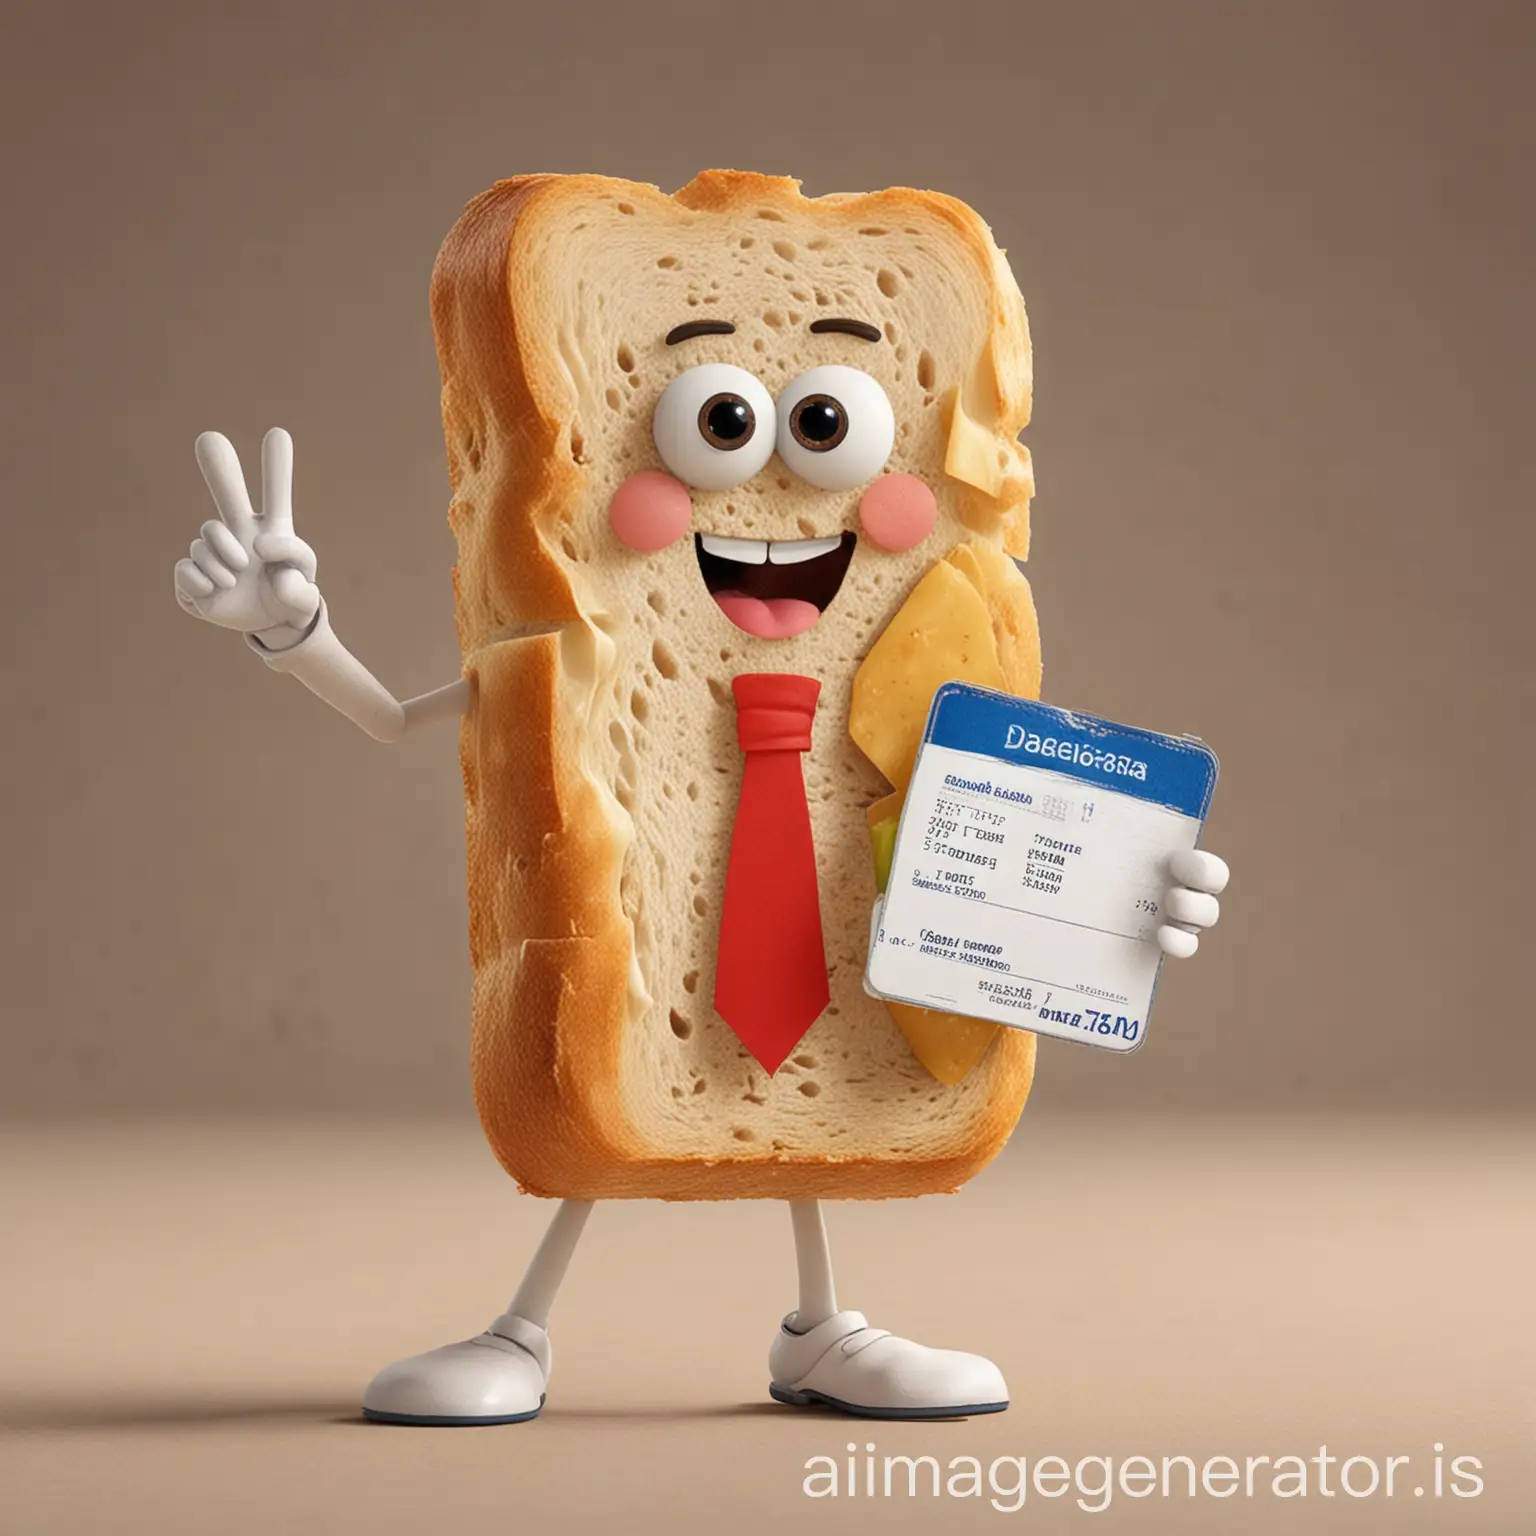 sandwich french baguette as character on 2 legs showing student id card as if the sandwich has a student id card